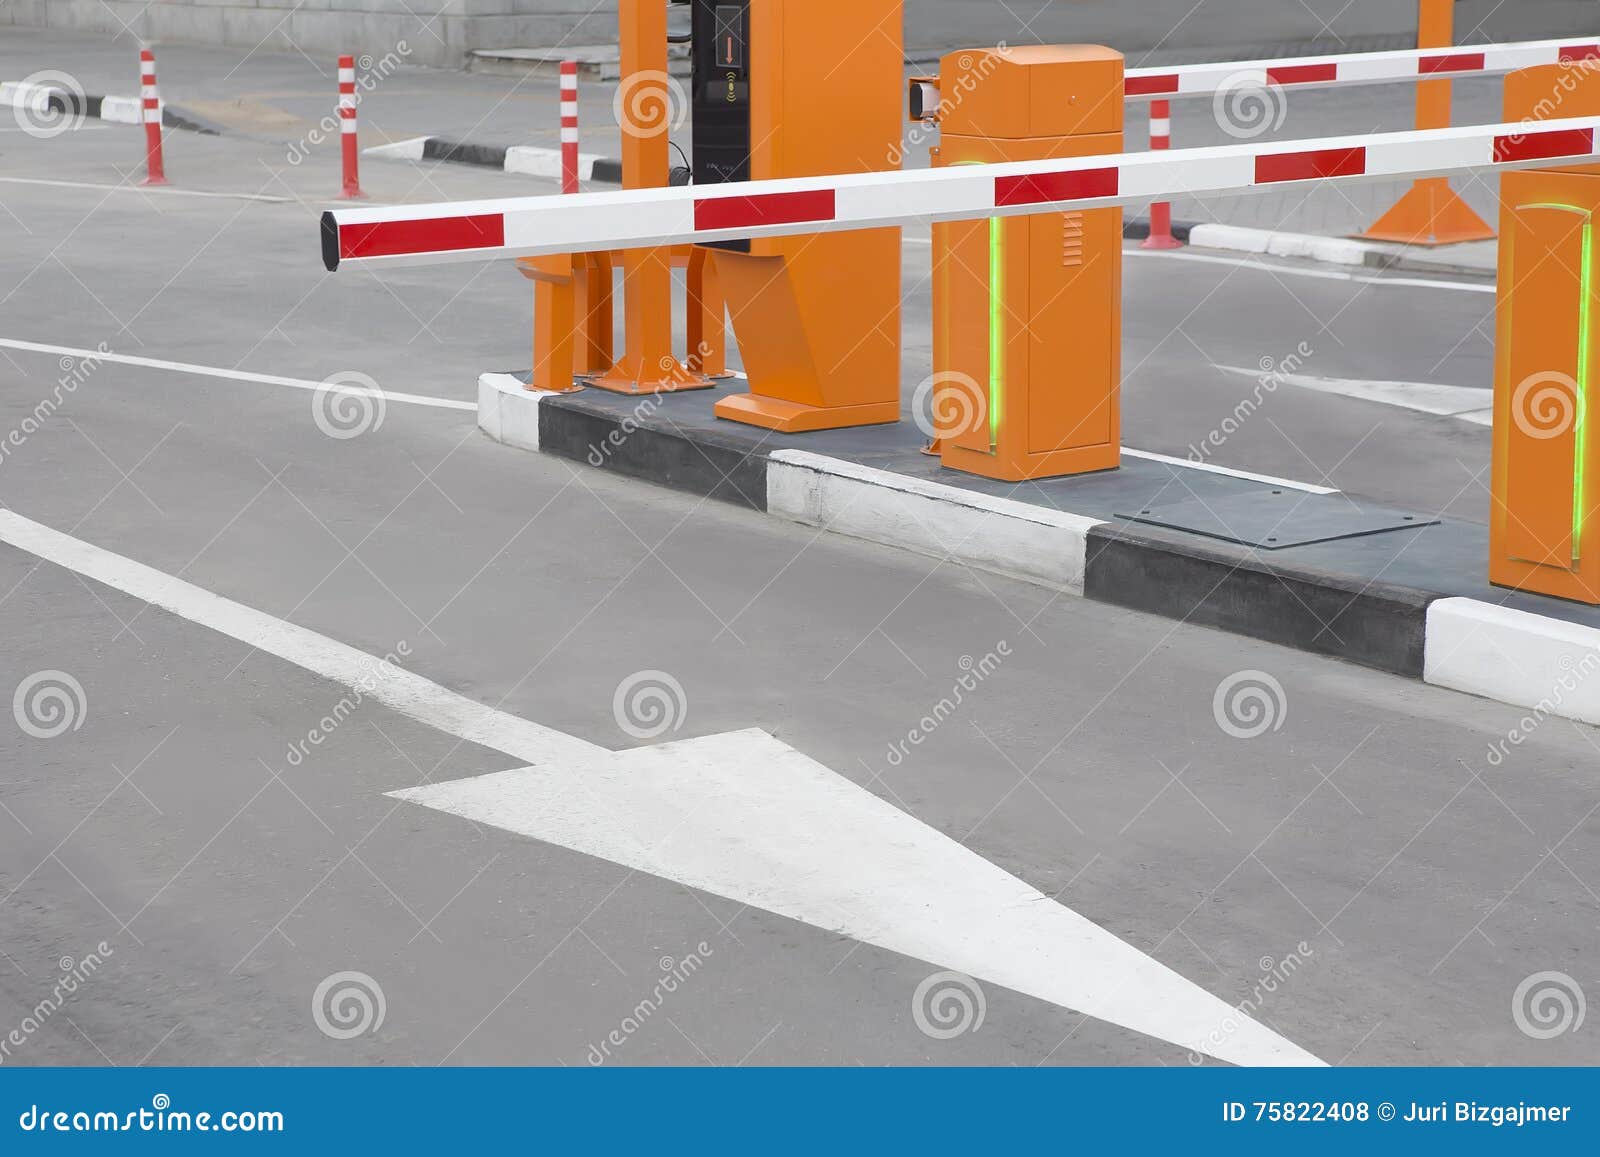 Barrier blocking entrance stock photo. Image of protection - 75822408